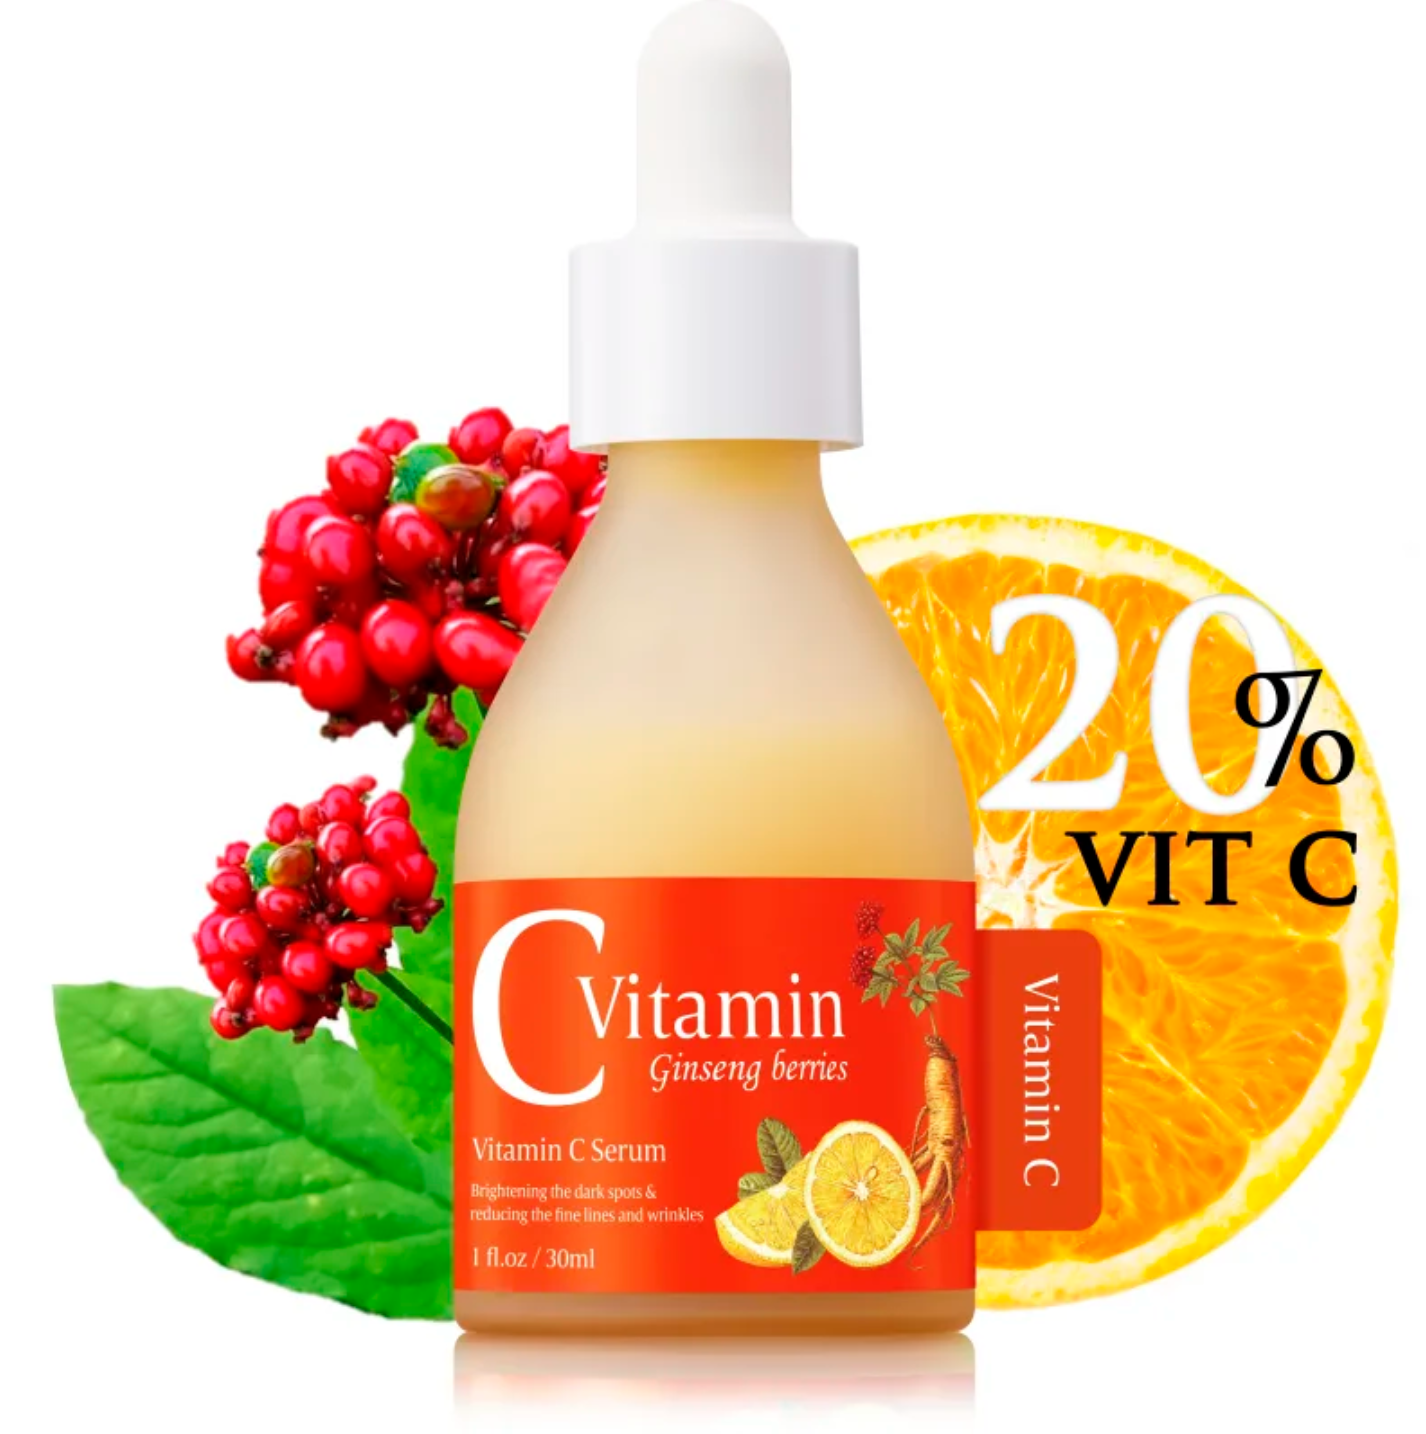 KLARMED Launches A 1+1 promotion on Amazon For Their Natural Vitamin C Serum